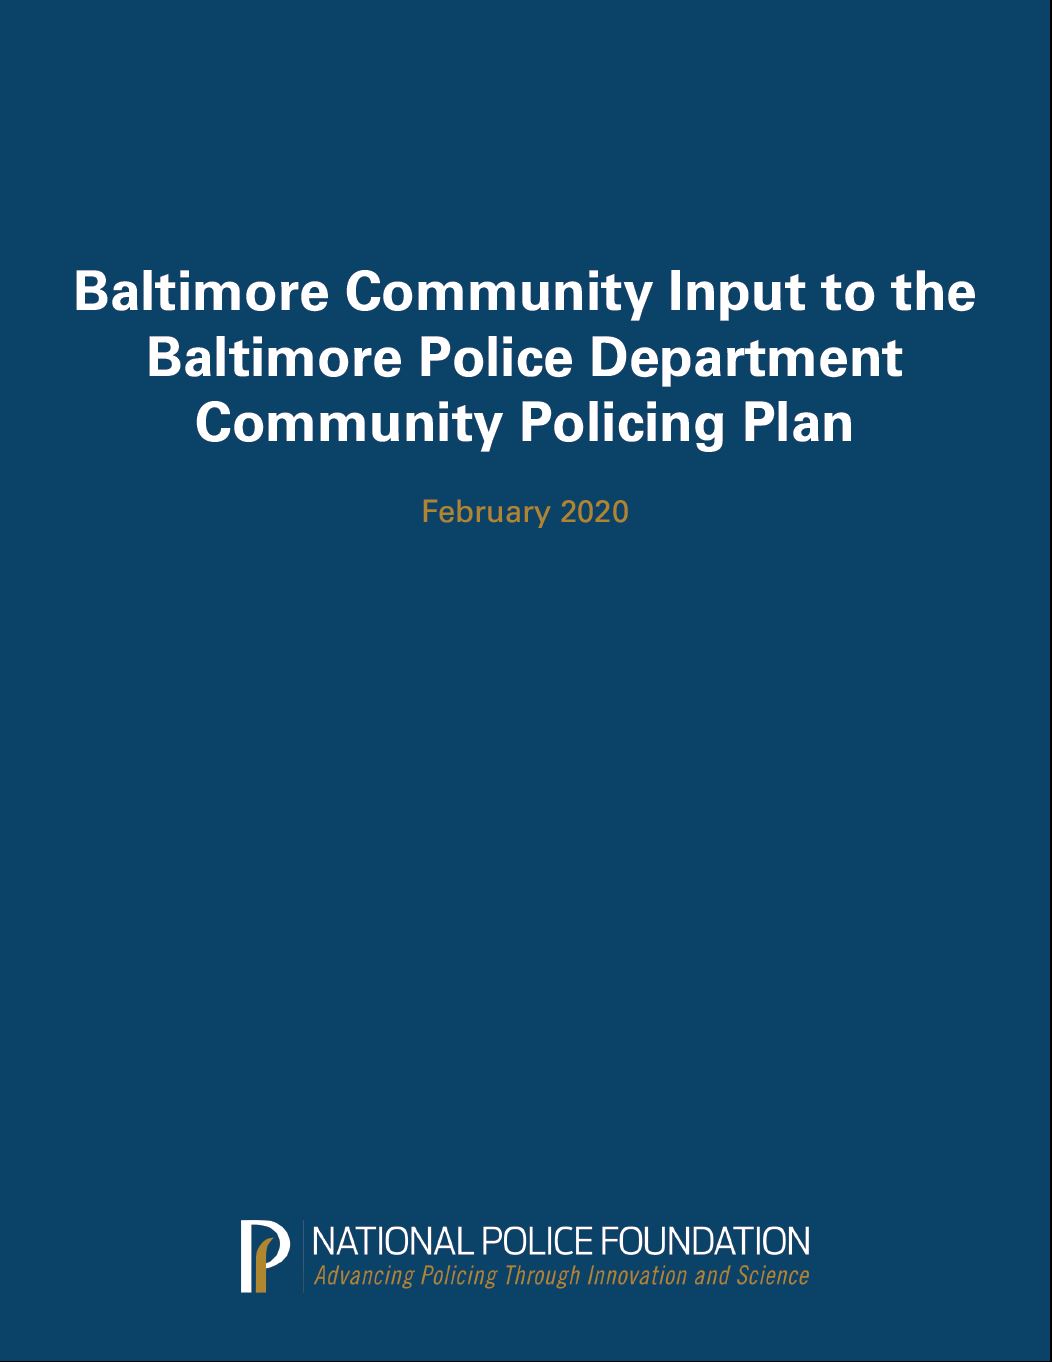 Baltimore Community Input Report cover